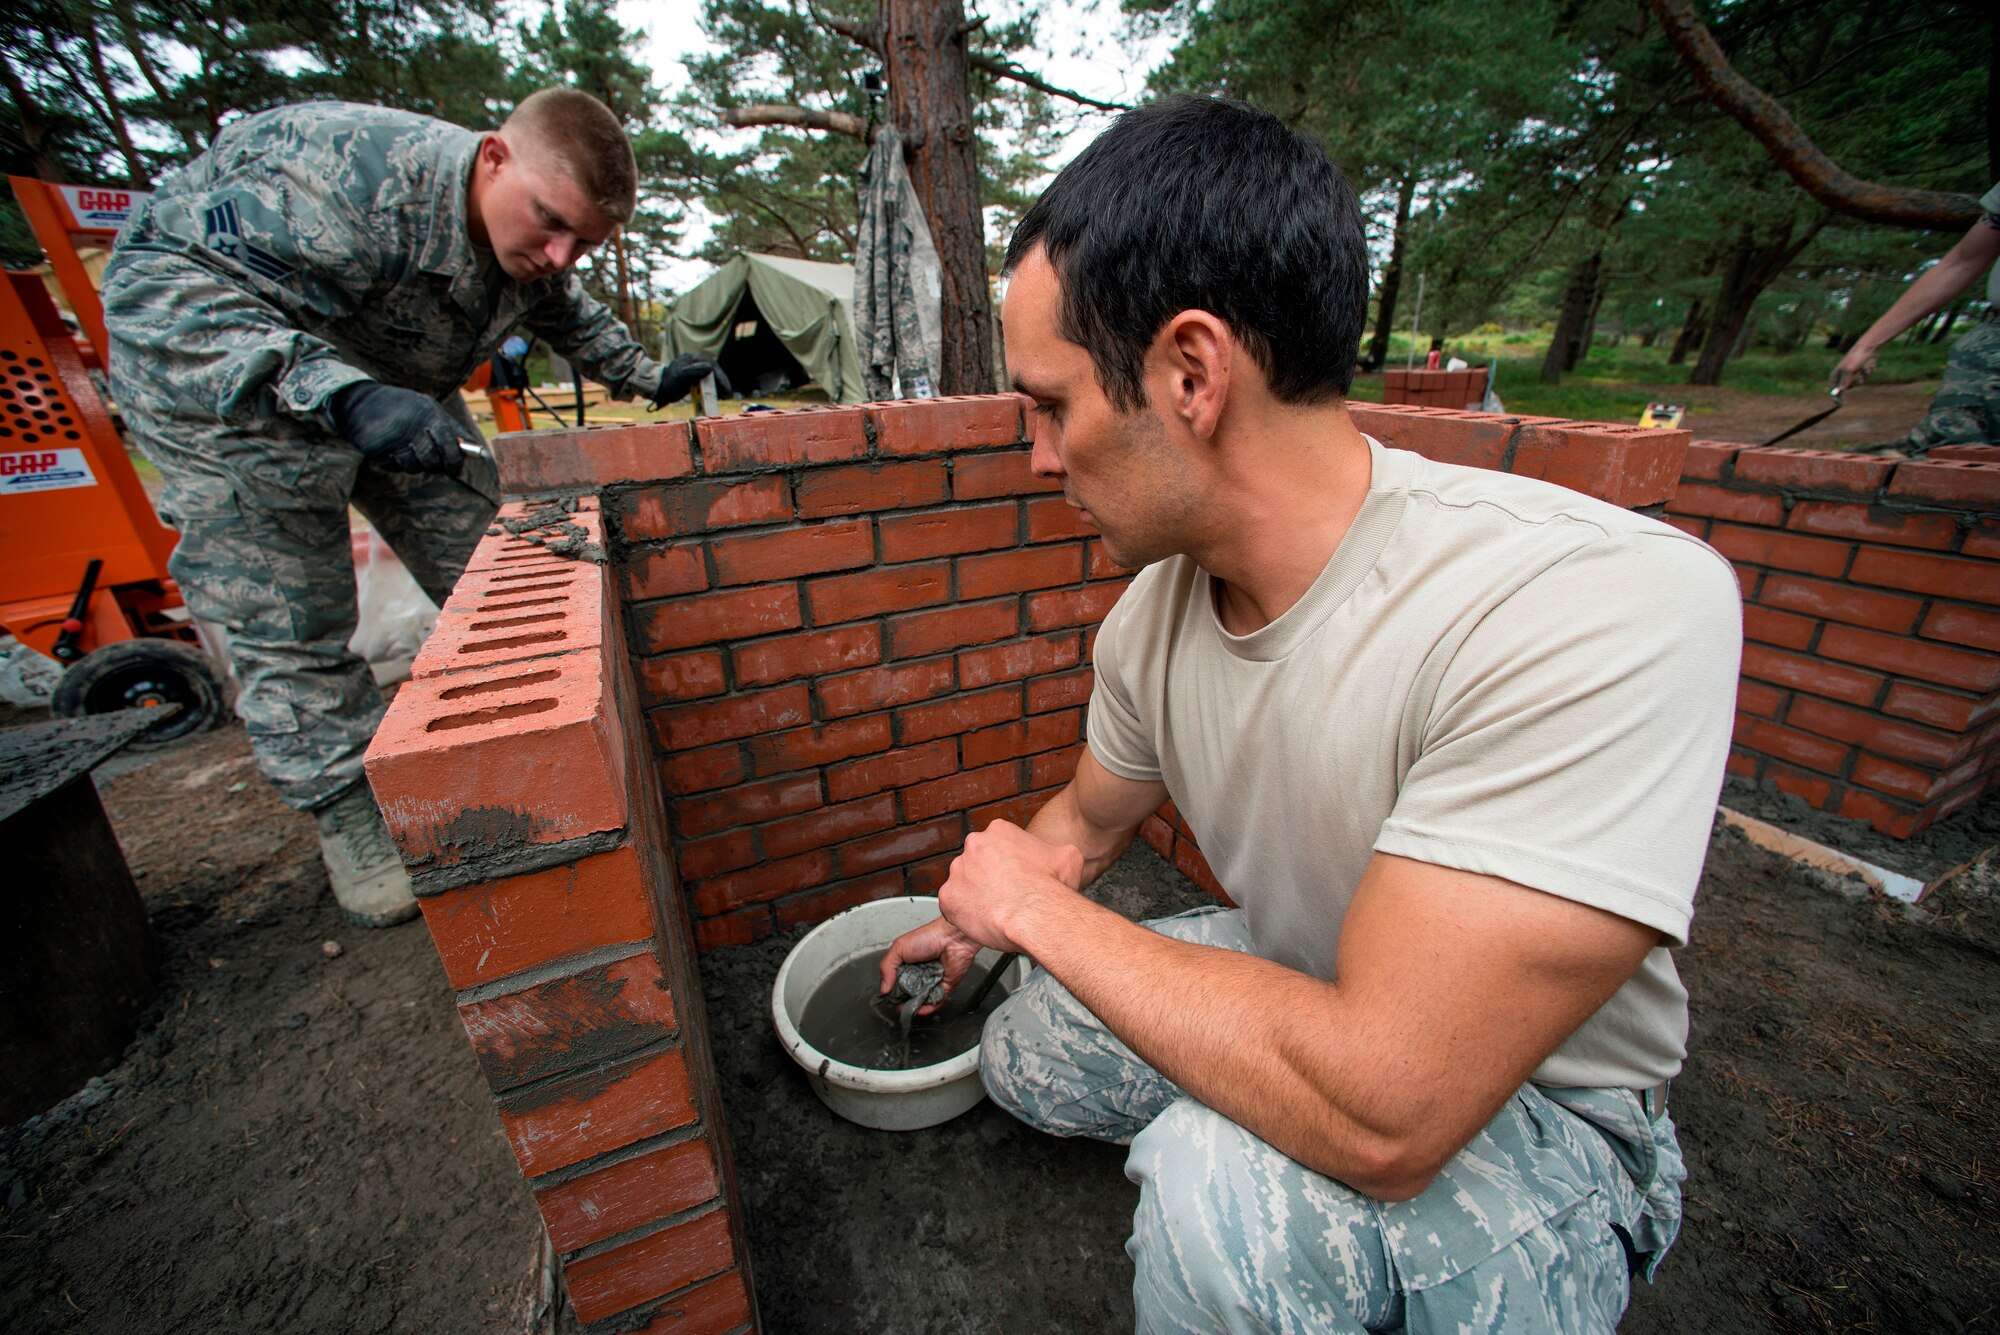 U.S. Air Force Senior Airman Justin Hoppe (left) and Staff Sgt. Tyson Bladassare, 140th Civil Engineer Squadron, Colorado Air National Guard, work on laying bricks on a new Barbecue Grill at a camp area, during a deployed for training trip, known as Exercise Flying Rose at Kinloss Barrack in Forres, Moray, Scotland, United Kingdom, Jun. 12, 2014. Over 40 members of the 140th CES are in Scotland for their annual training and are accomplishing five construction projects that will improve several areas around Kinloss Barracks, during Exercise Flying Rose hosted by the British Army before returning back to Colorado later this month. (U.S. Air National Guard photo byTech. Sgt. Wolfram M. Stumpf)